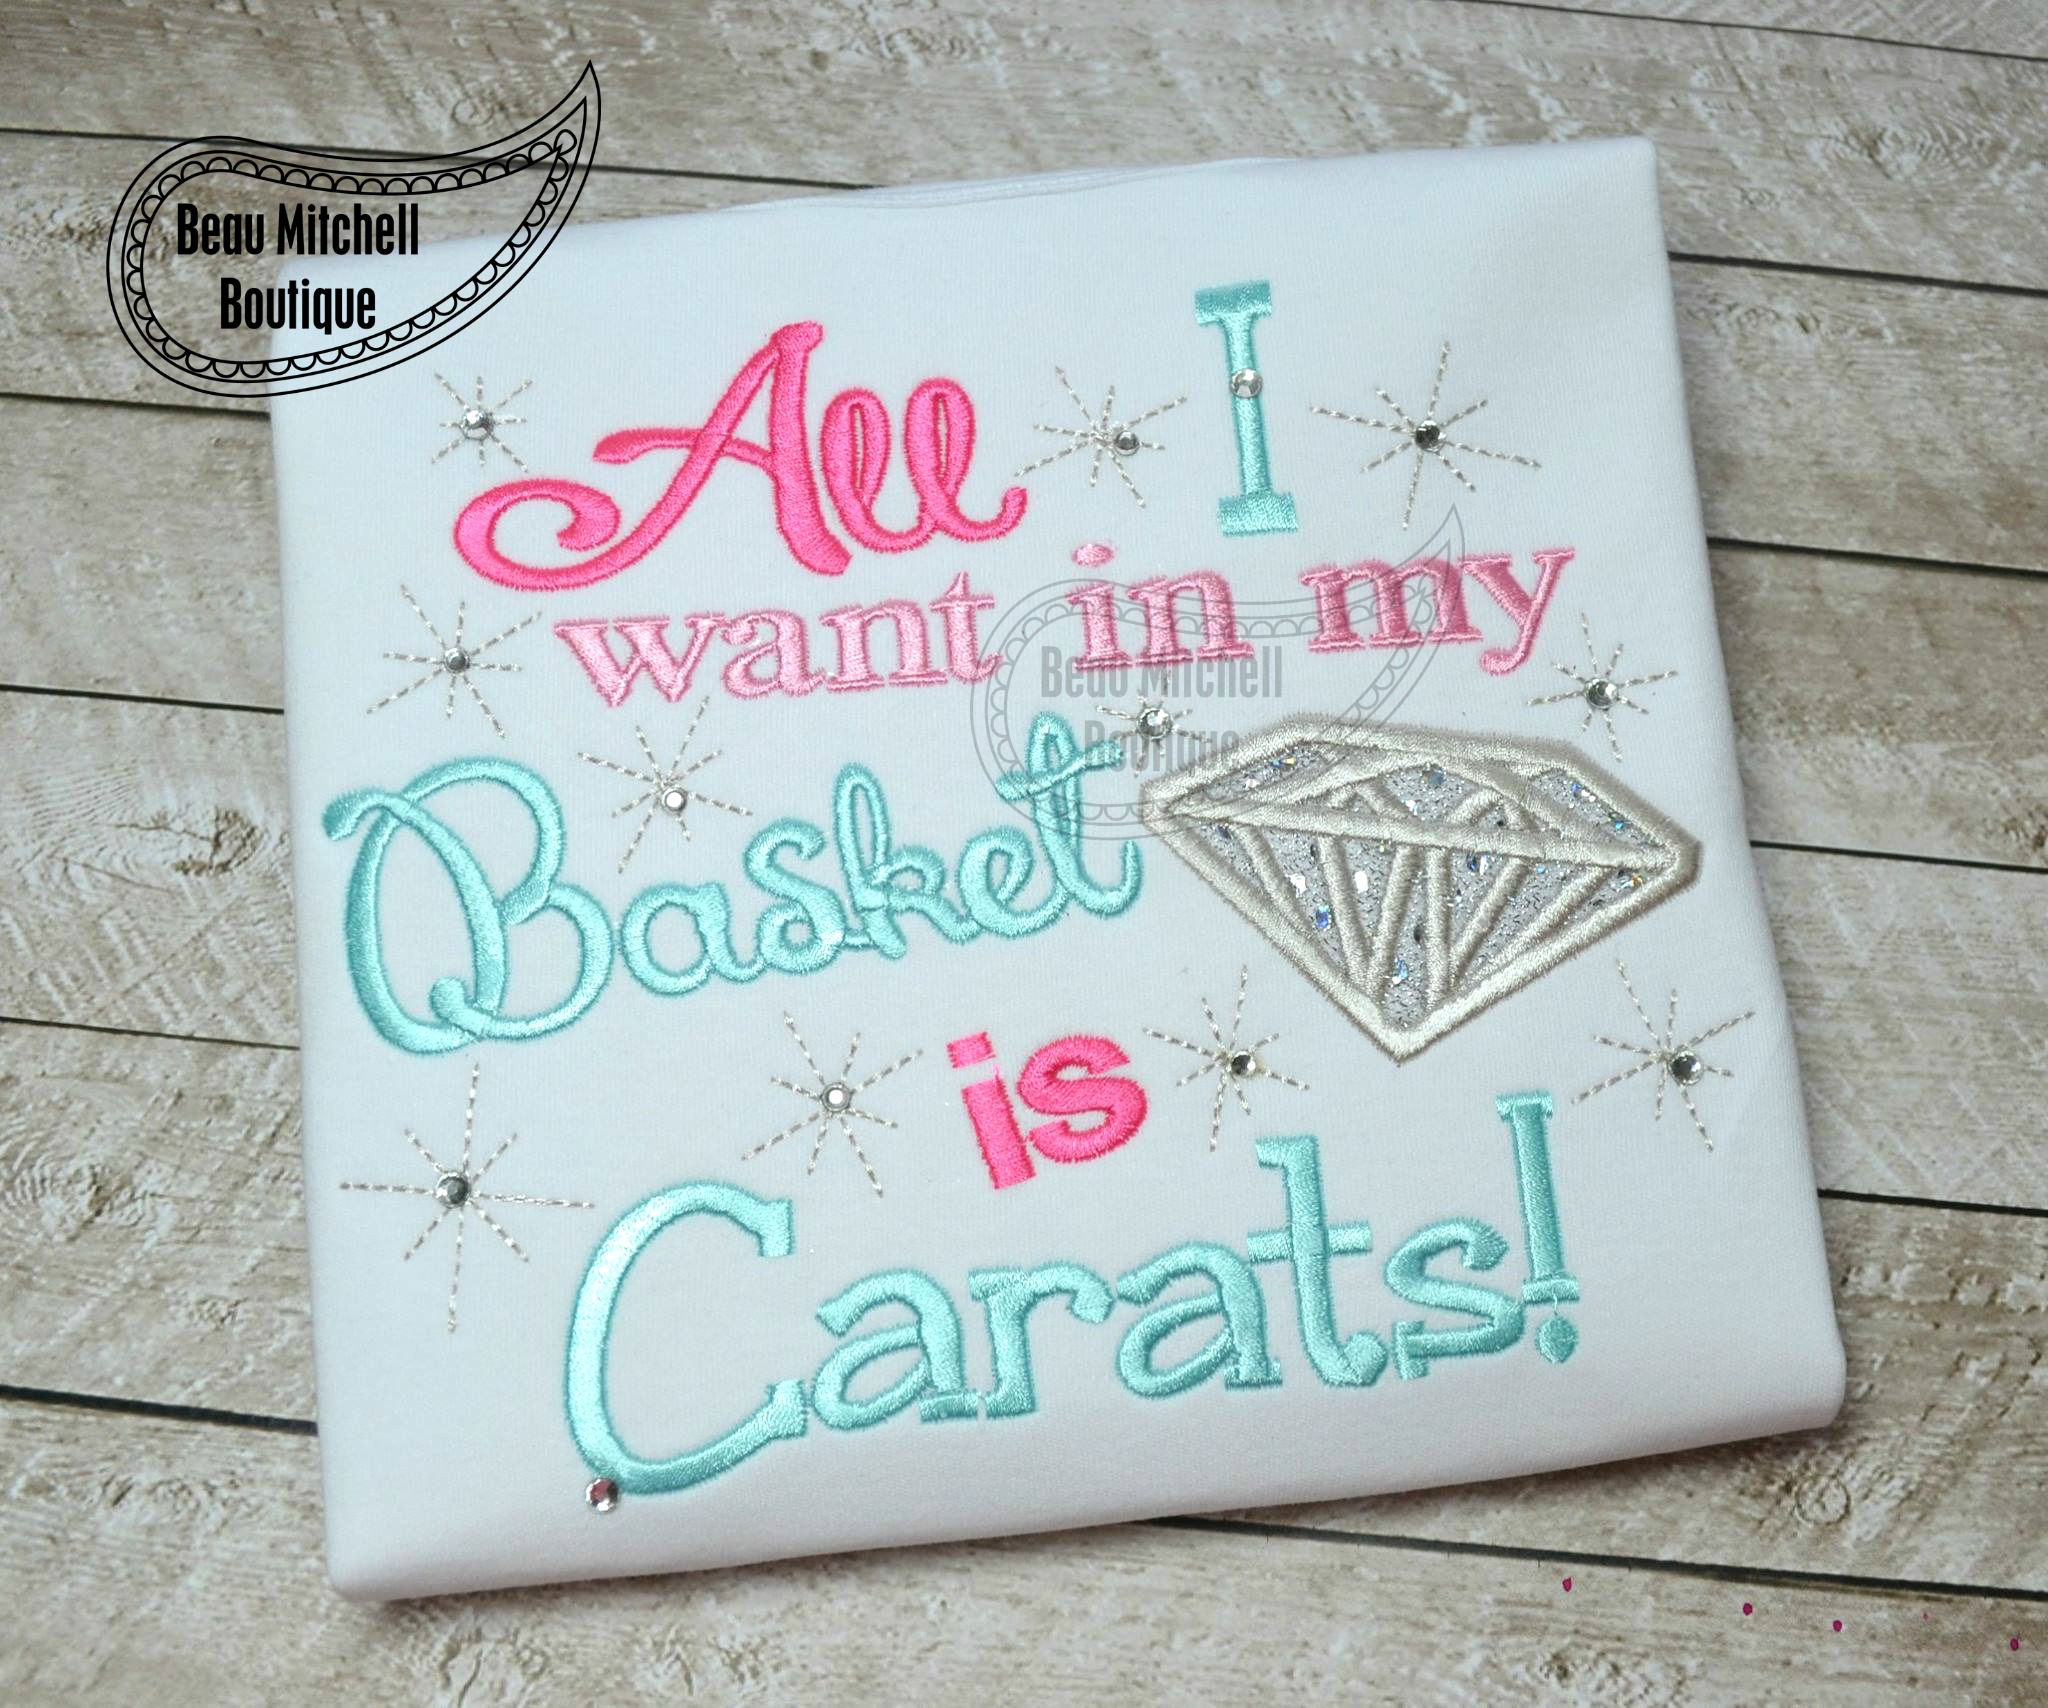 All I want in my basket is CARATS